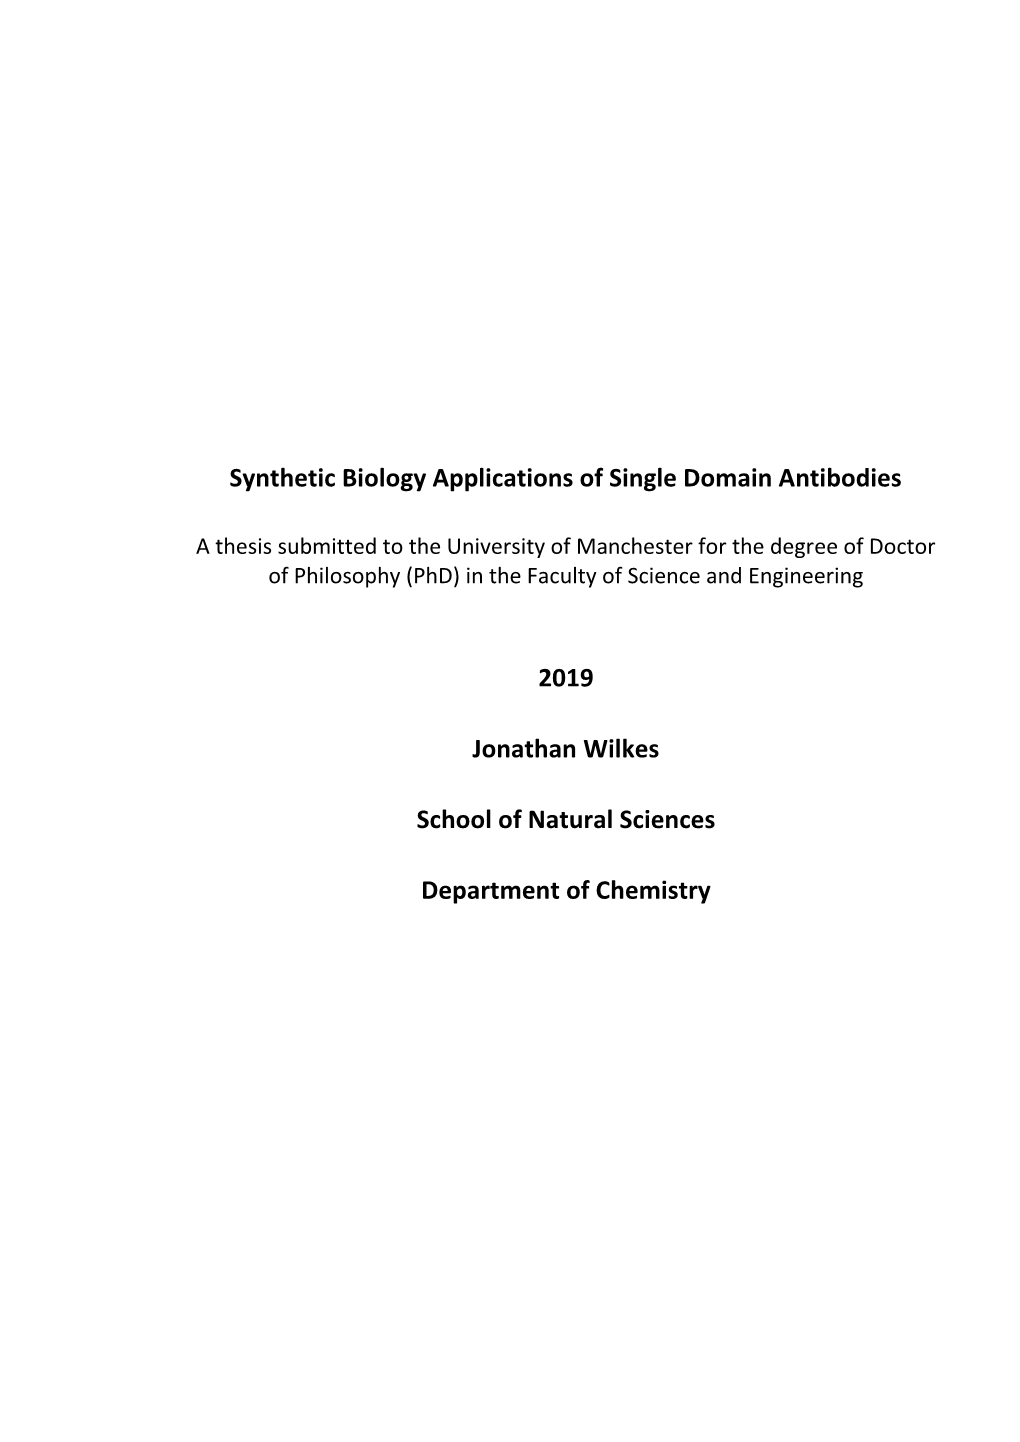 Synthetic Biology Applications of Single Domain Antibodies